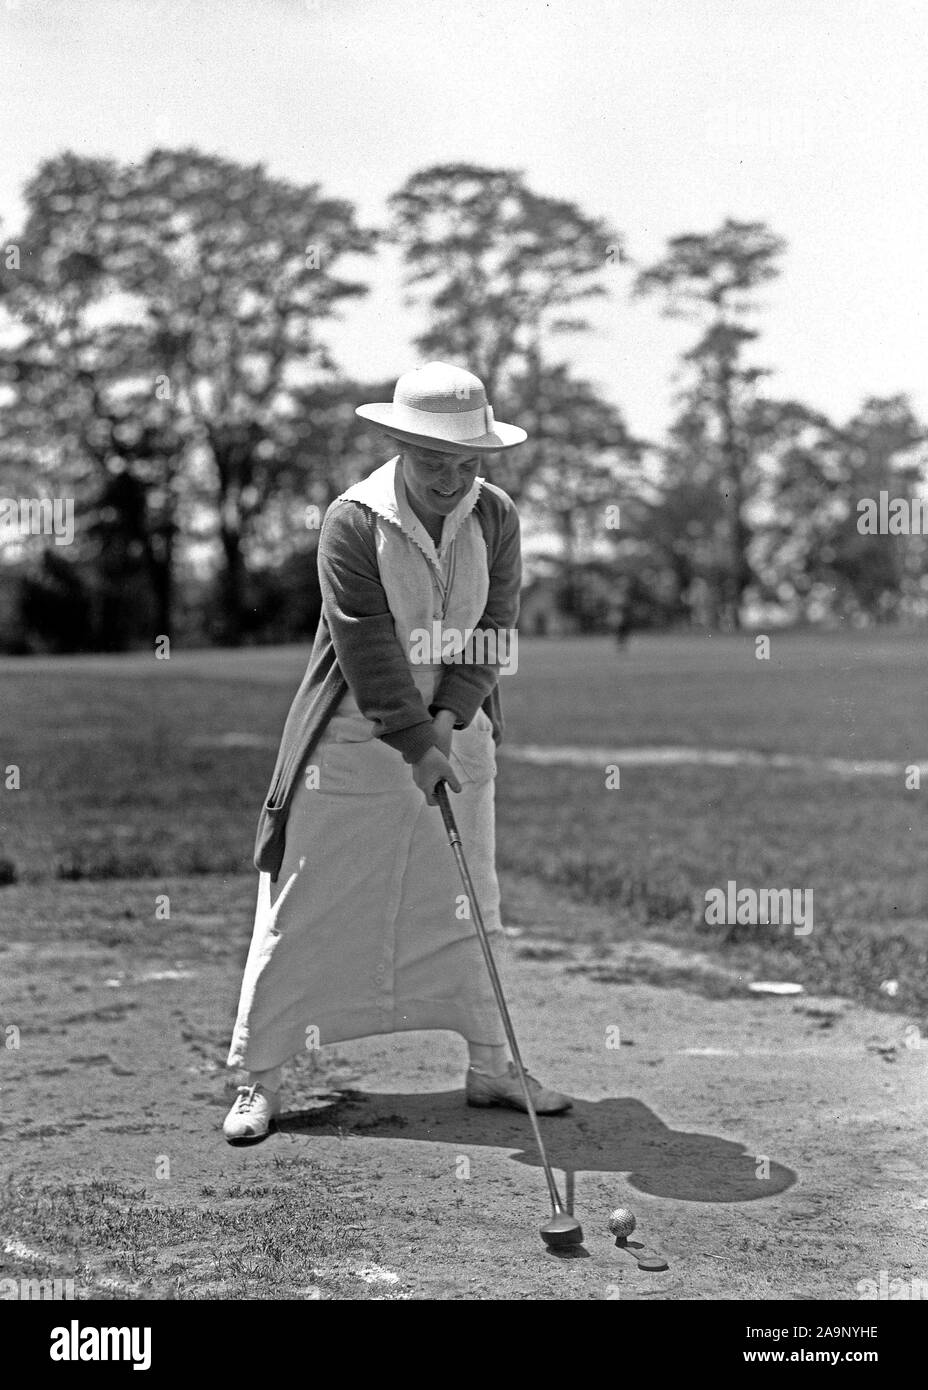 Early 1900s Photos - Woman hitting a golf ball out of a sand trap ...